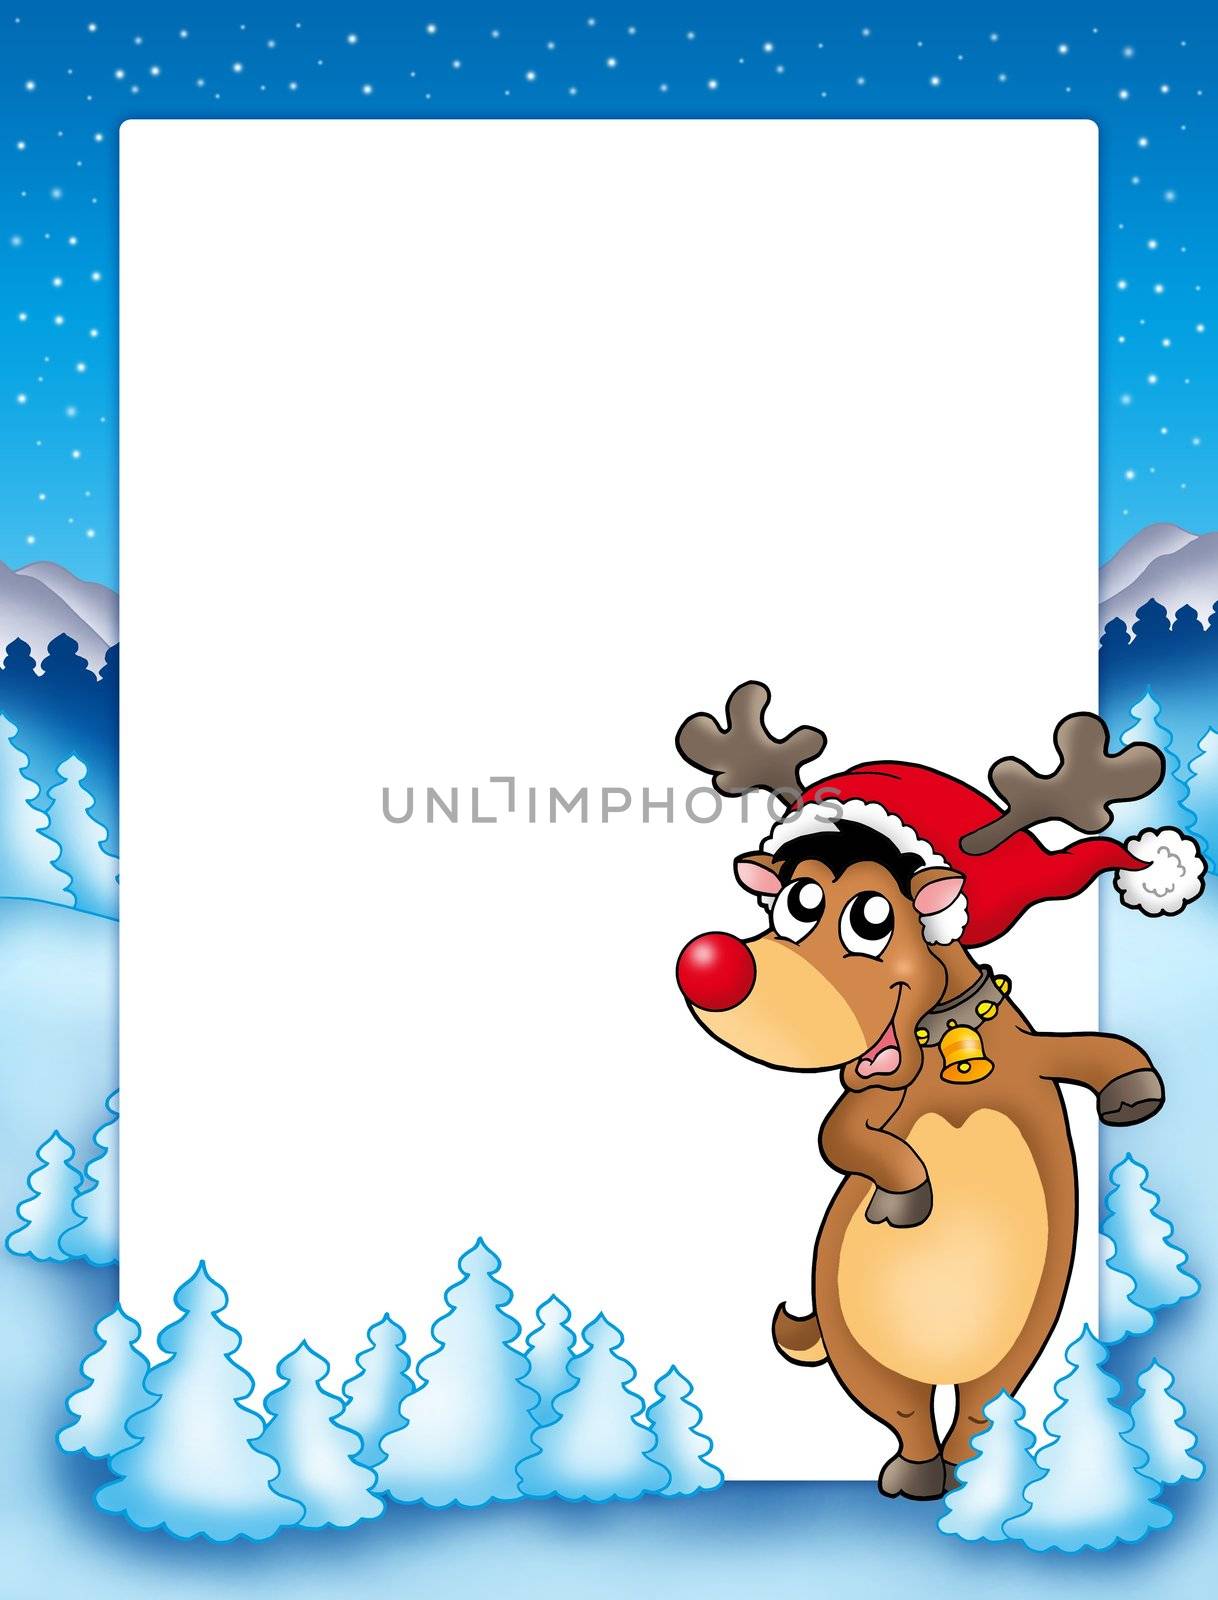 Christmas frame with cute reindeer - color illustration.